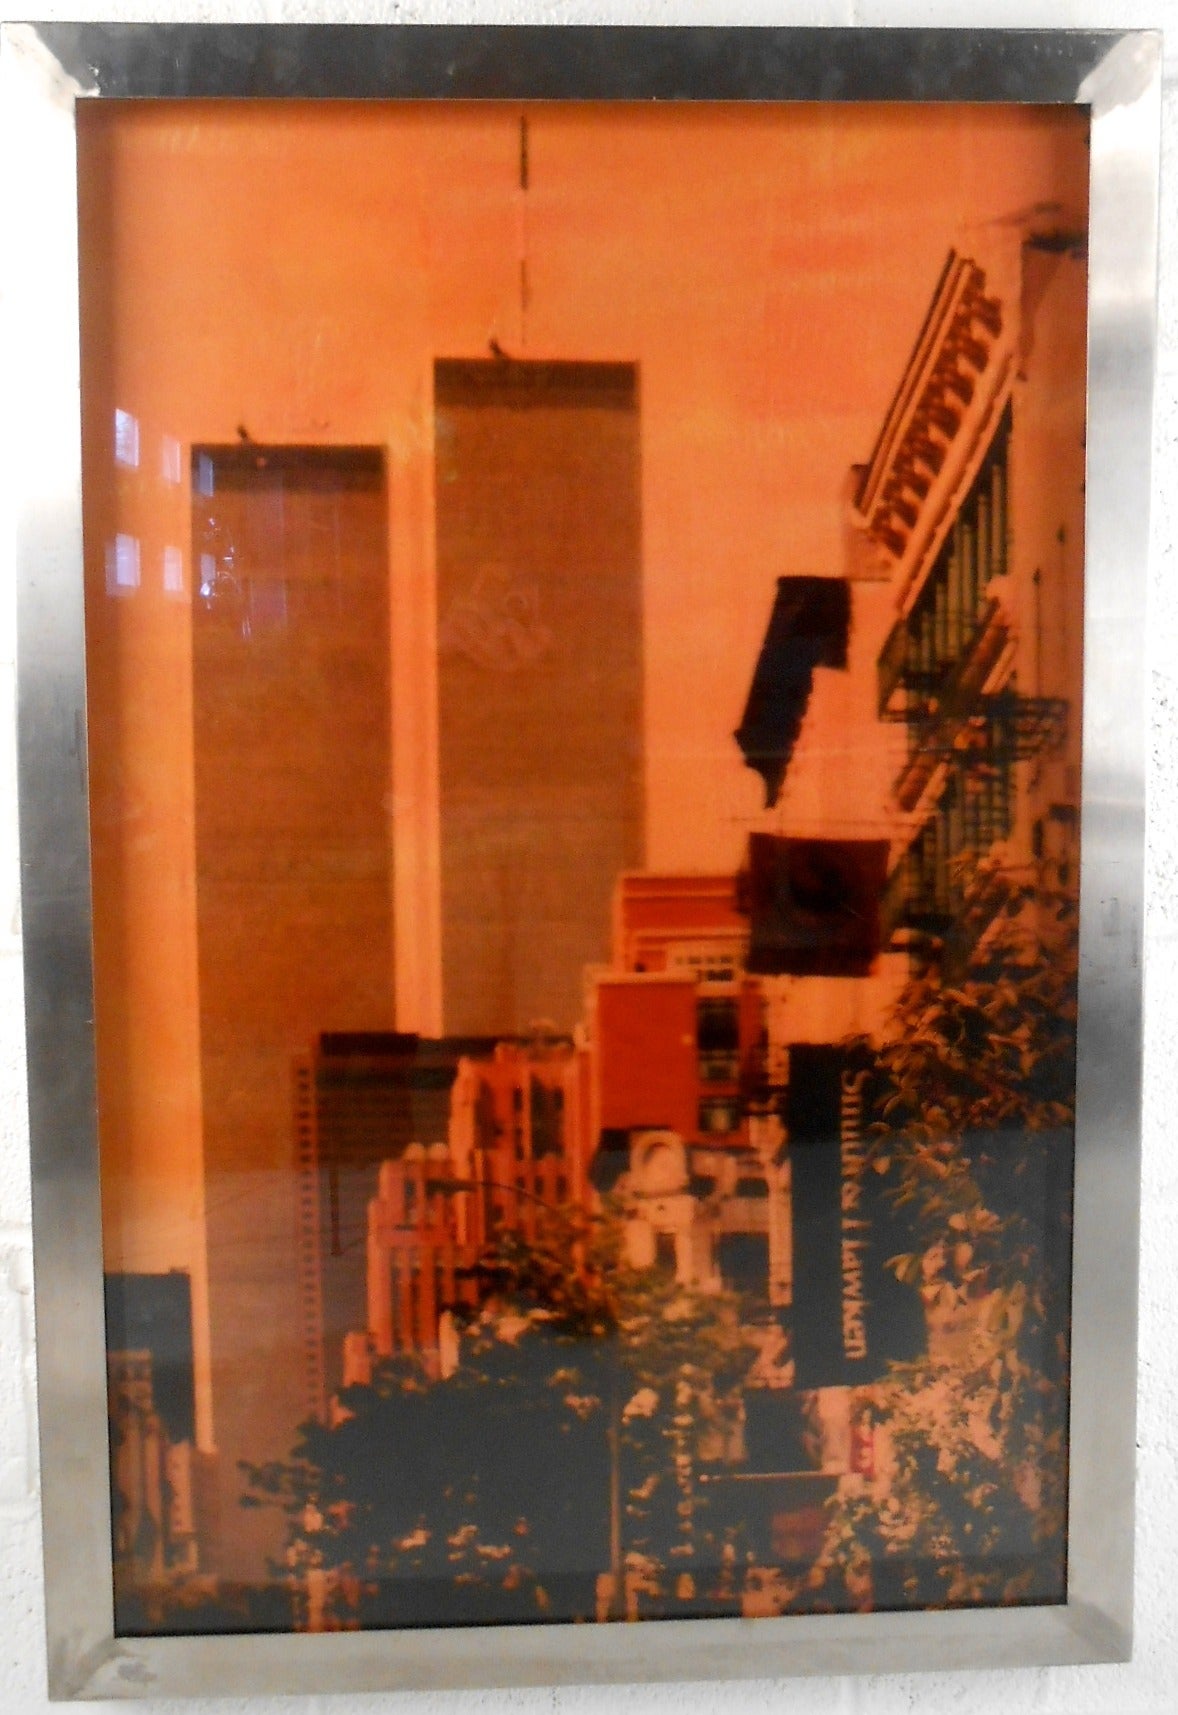 This uniquely framed photograph captures a pre 9/11 World Trade Center through the lens of artist Isack Kousnsky. Known for his colorful interpretations of photographic genius, this beautiful reminder of beloved cityscape makes a unique addition to